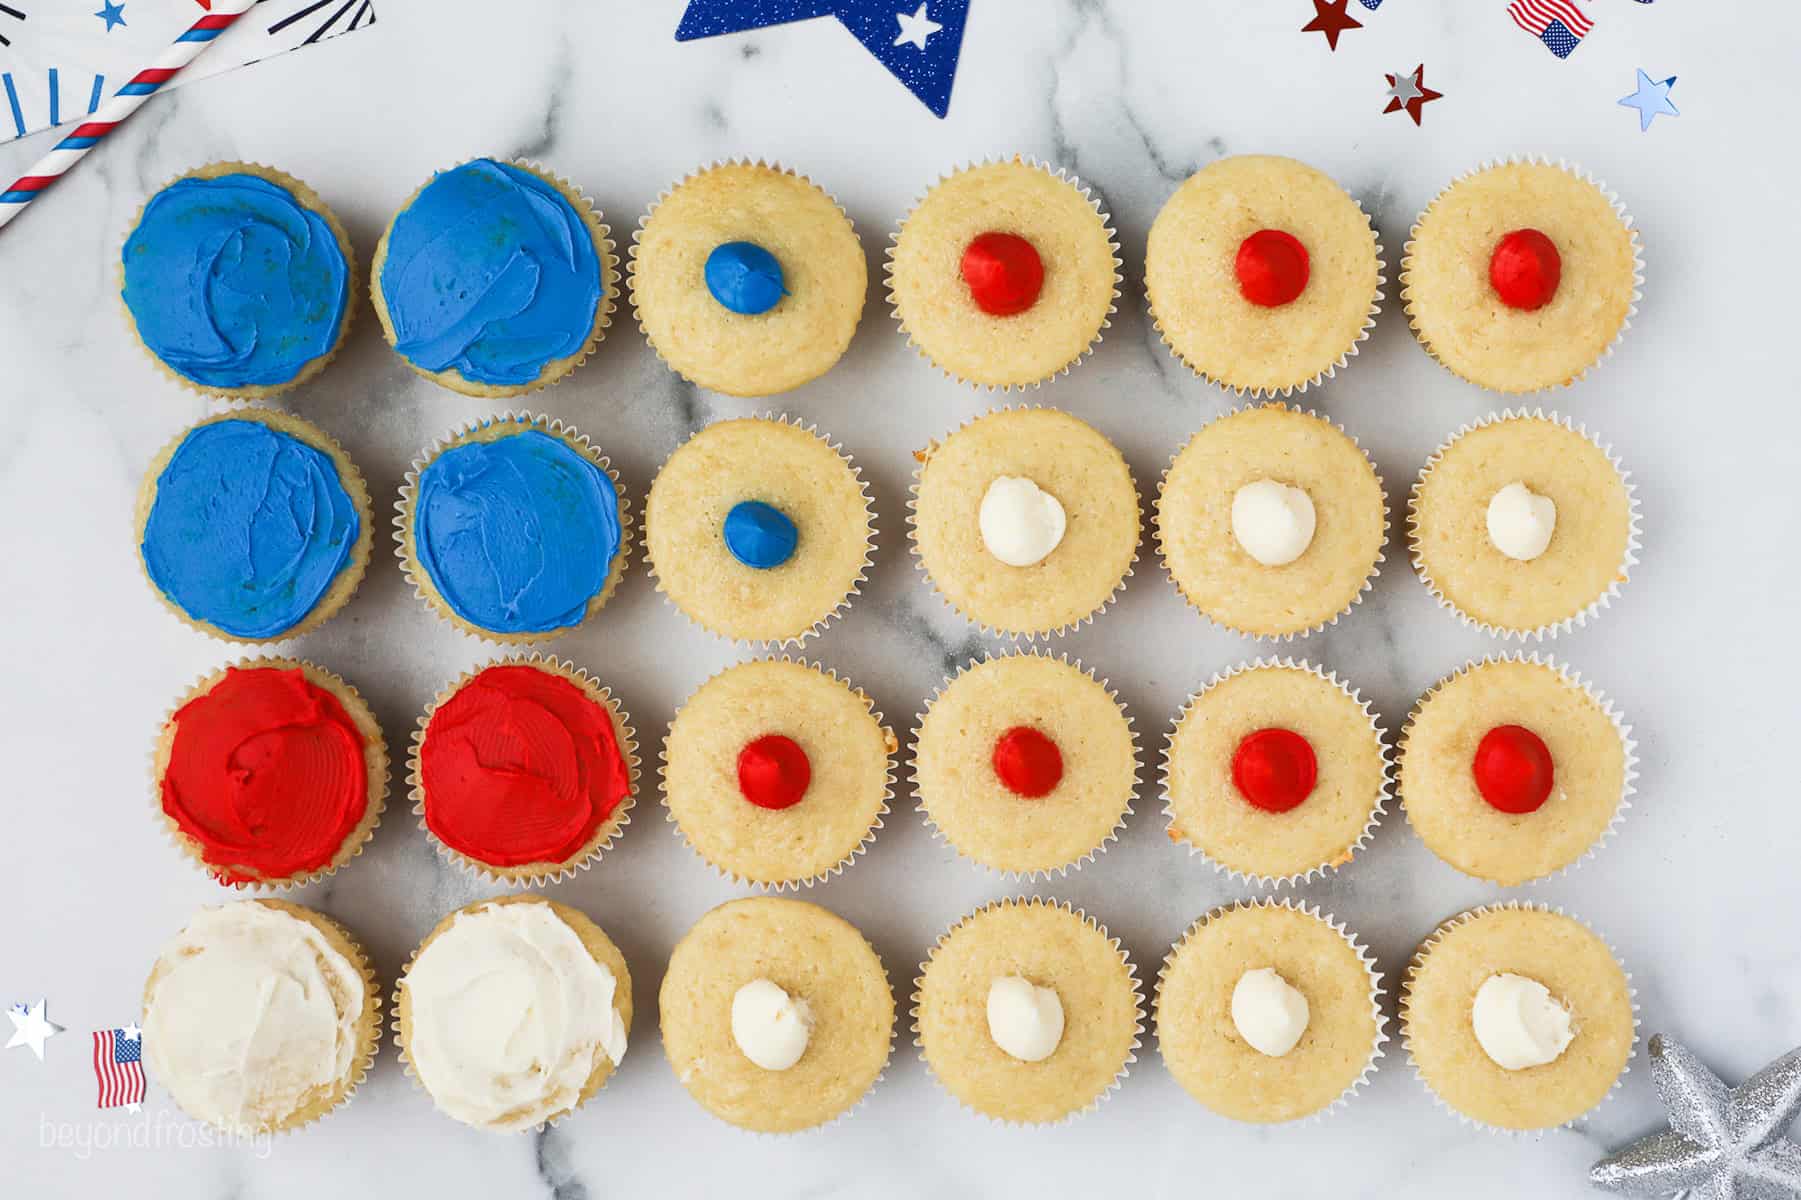 Overhead view of 24 cupcakes partially frosted with red, white, and blue frosting arranged in the shape of an American flag.